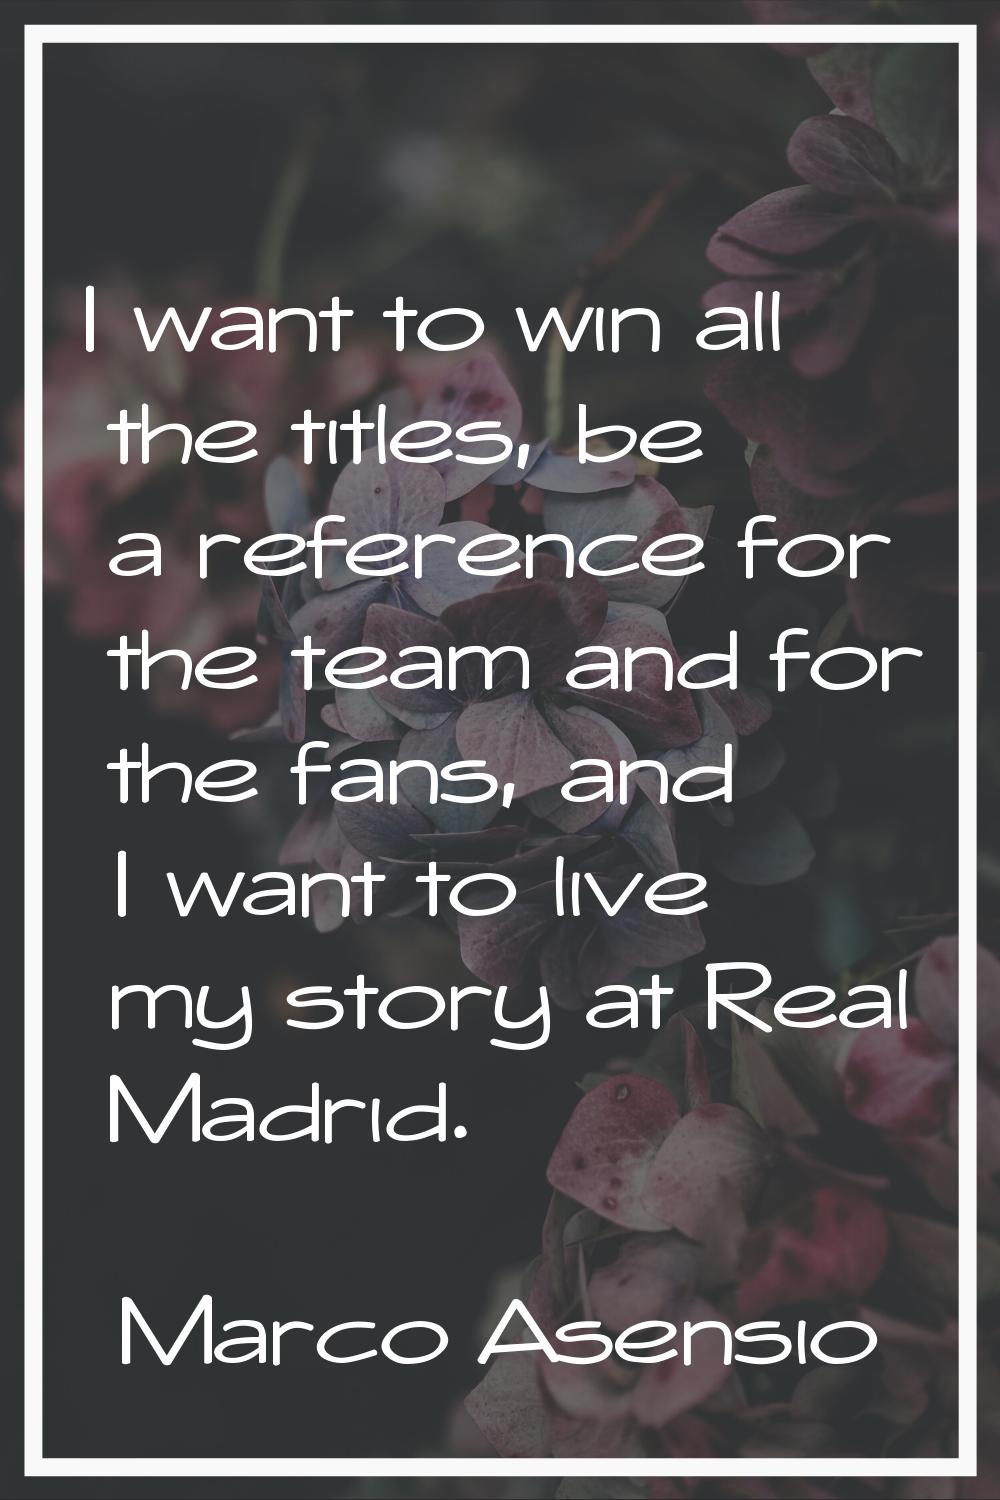 I want to win all the titles, be a reference for the team and for the fans, and I want to live my s